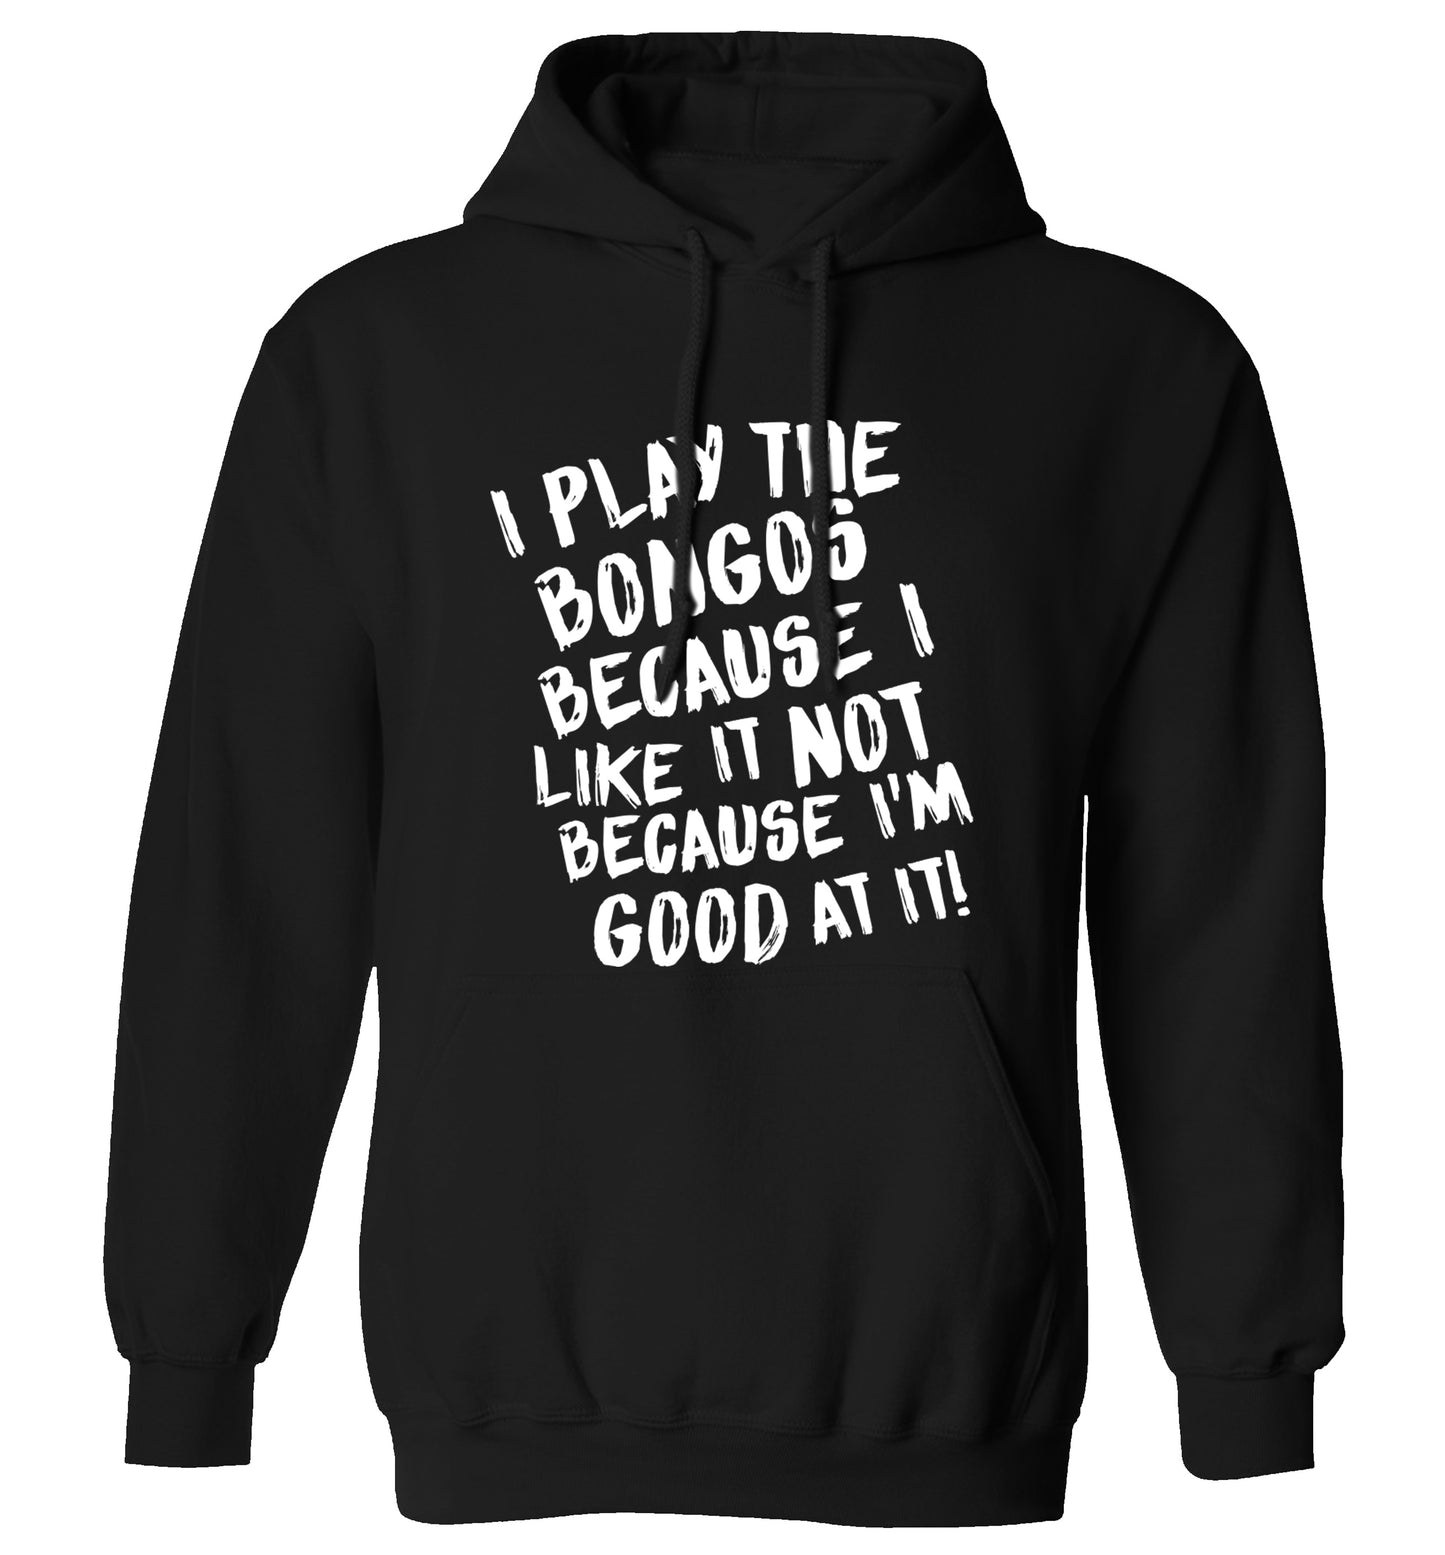 I play the bongos because I like it not because I'm good at it adults unisex black hoodie 2XL